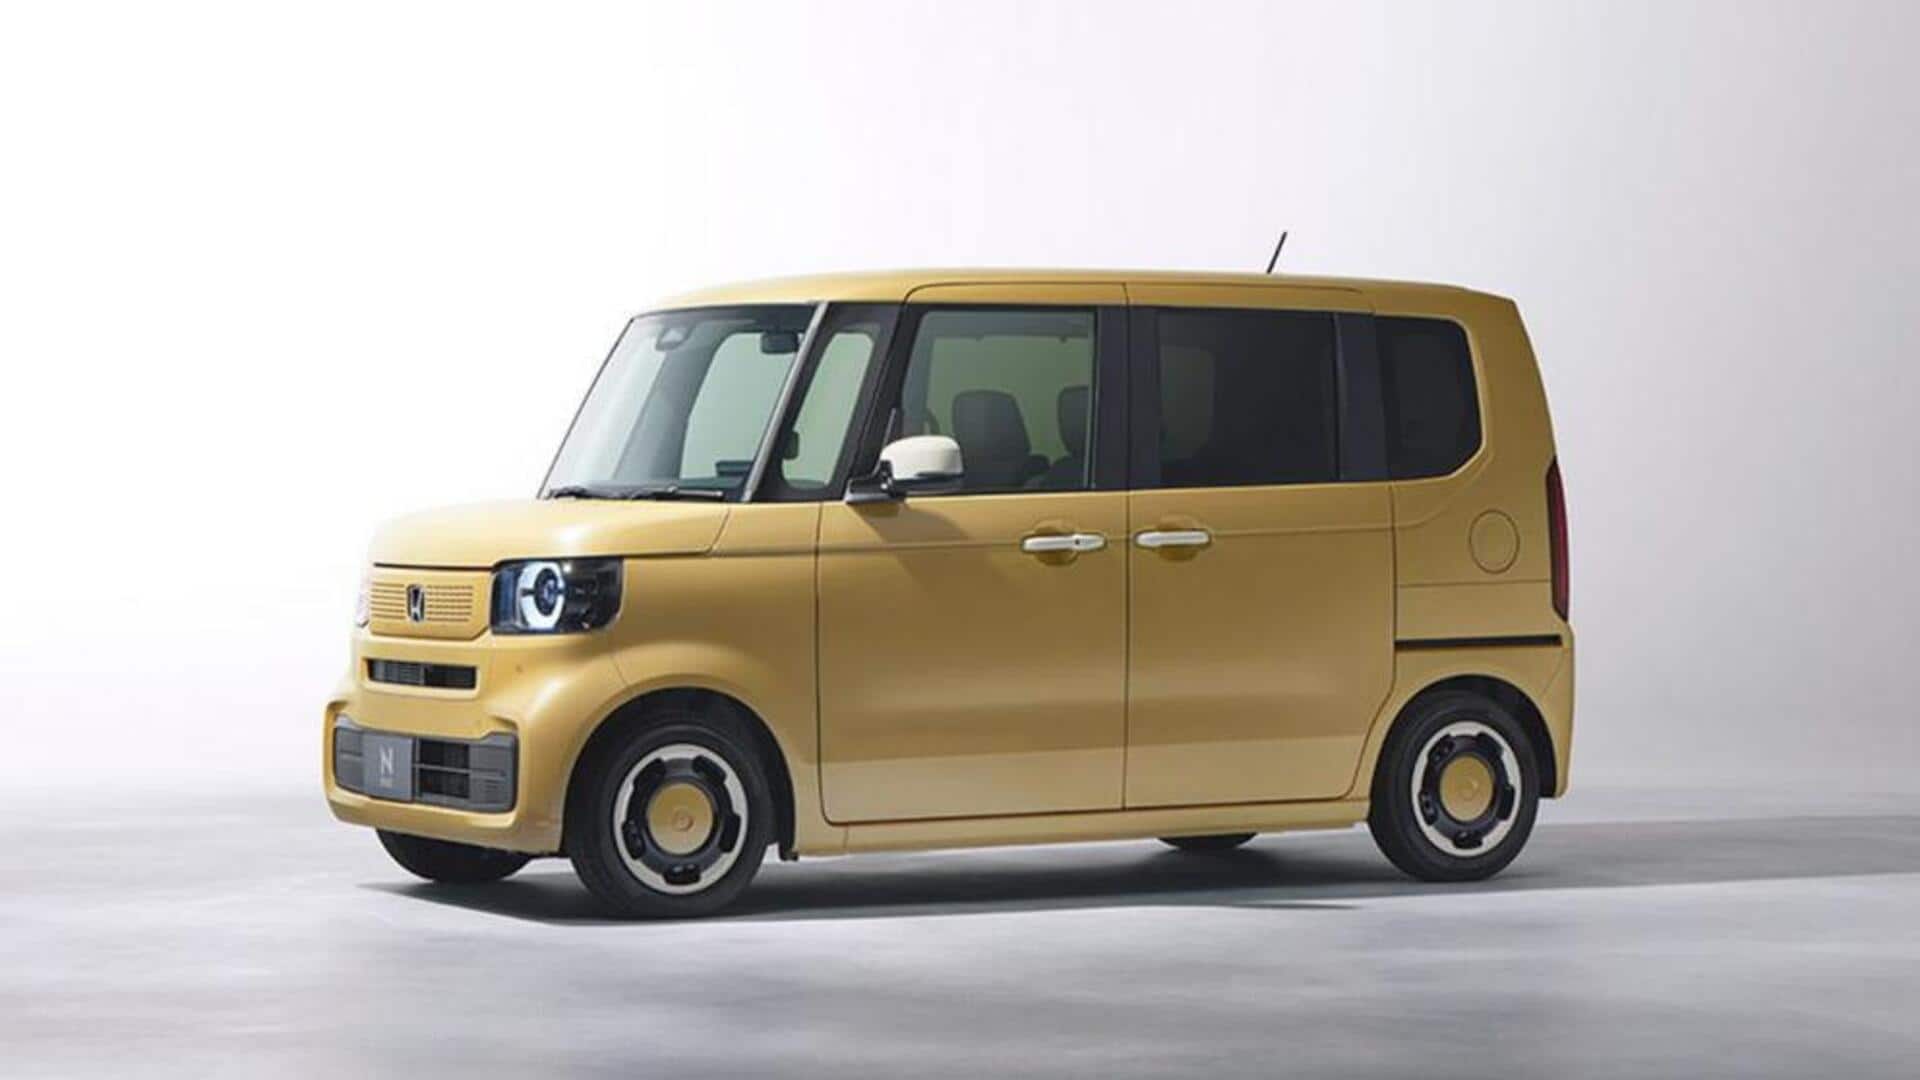 Honda's third-generation N-Box debuts with boxy design and improved practicality